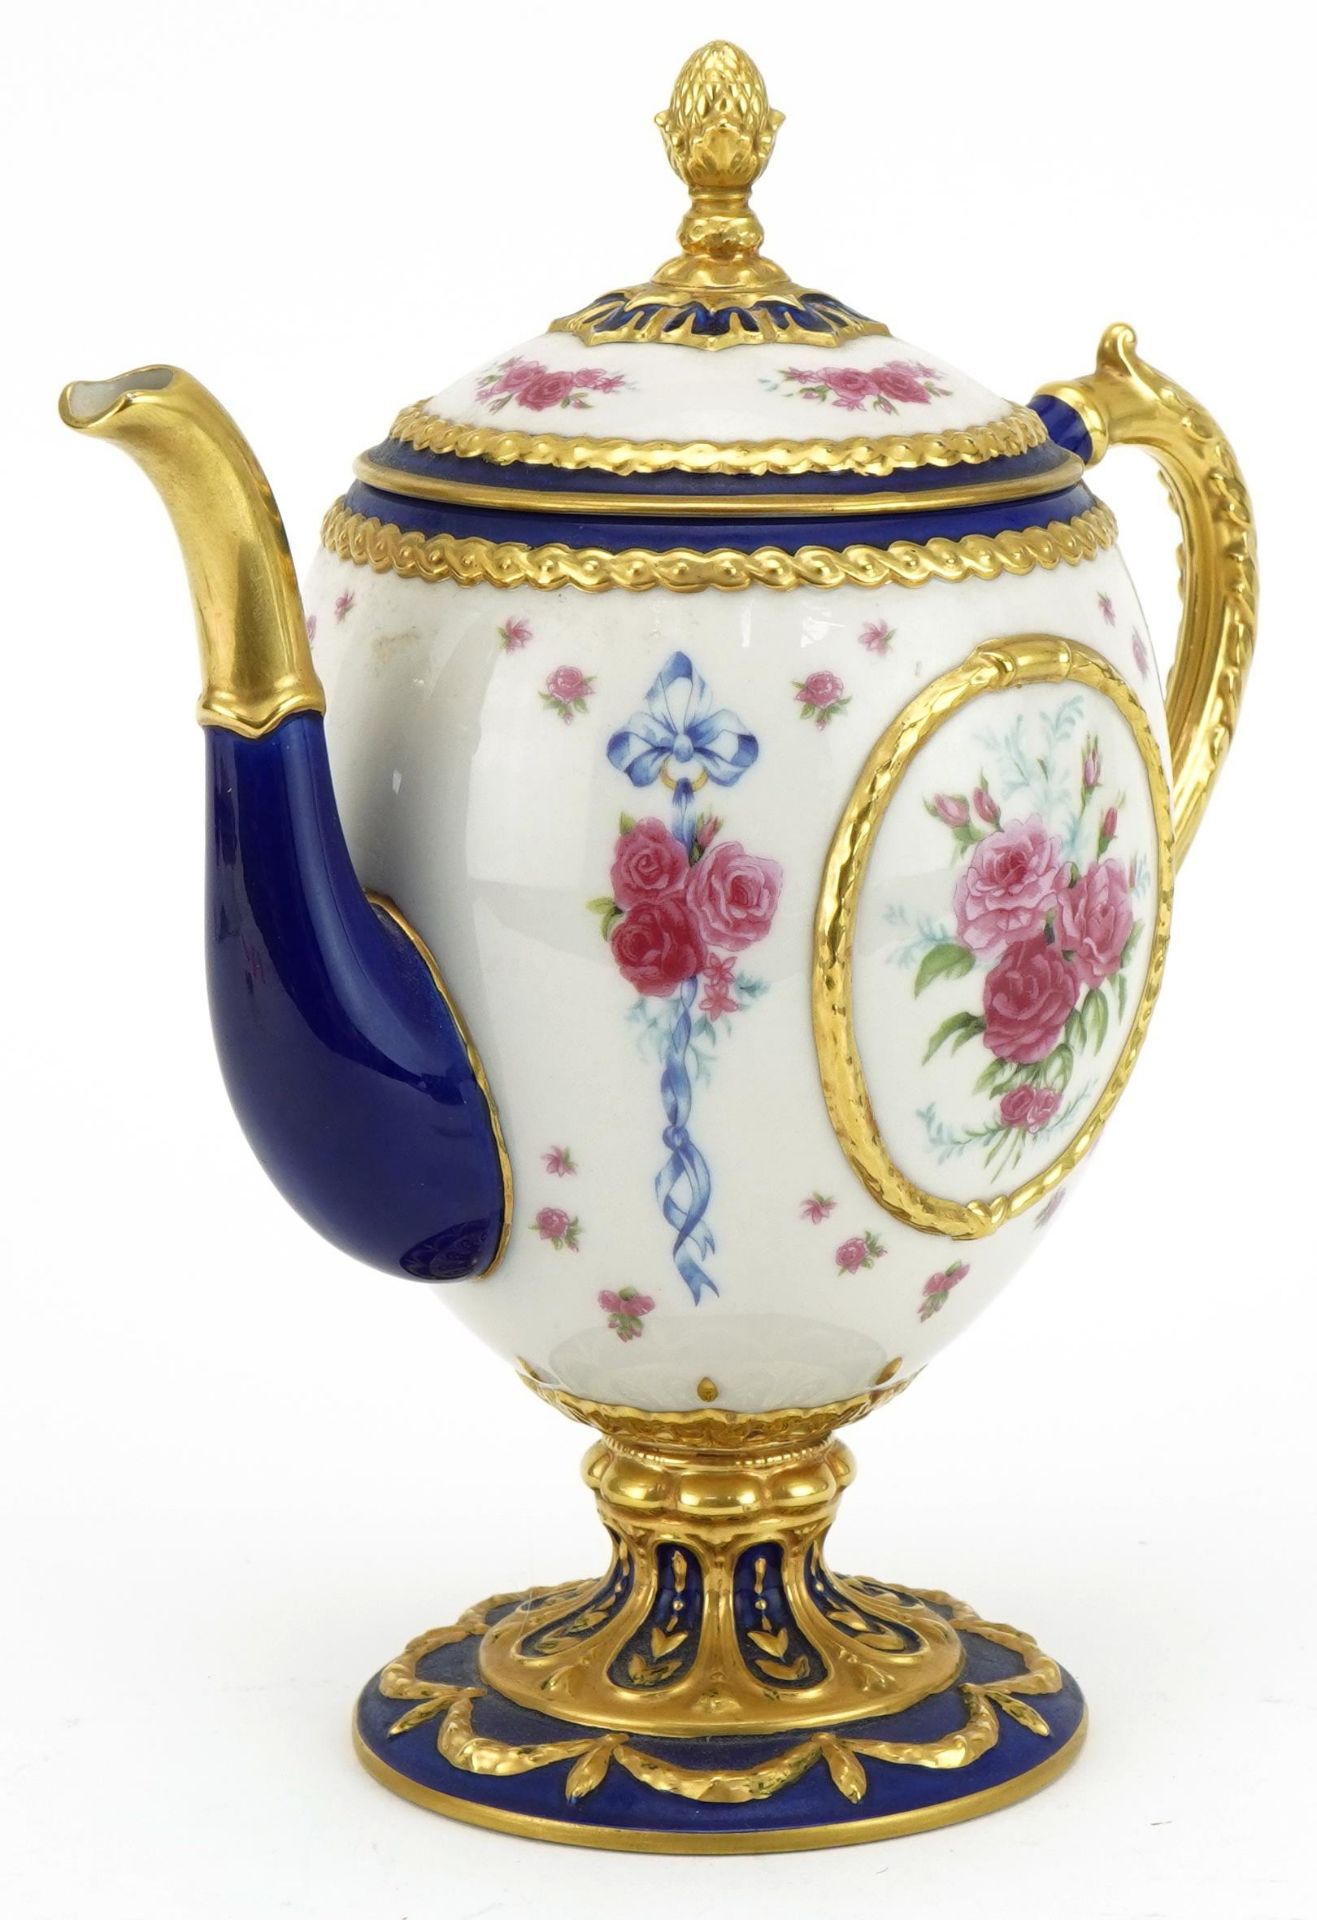 Franklin Mint House of Faberge Faberge Egg Imperial porcelain teapot, 24cm high : For further